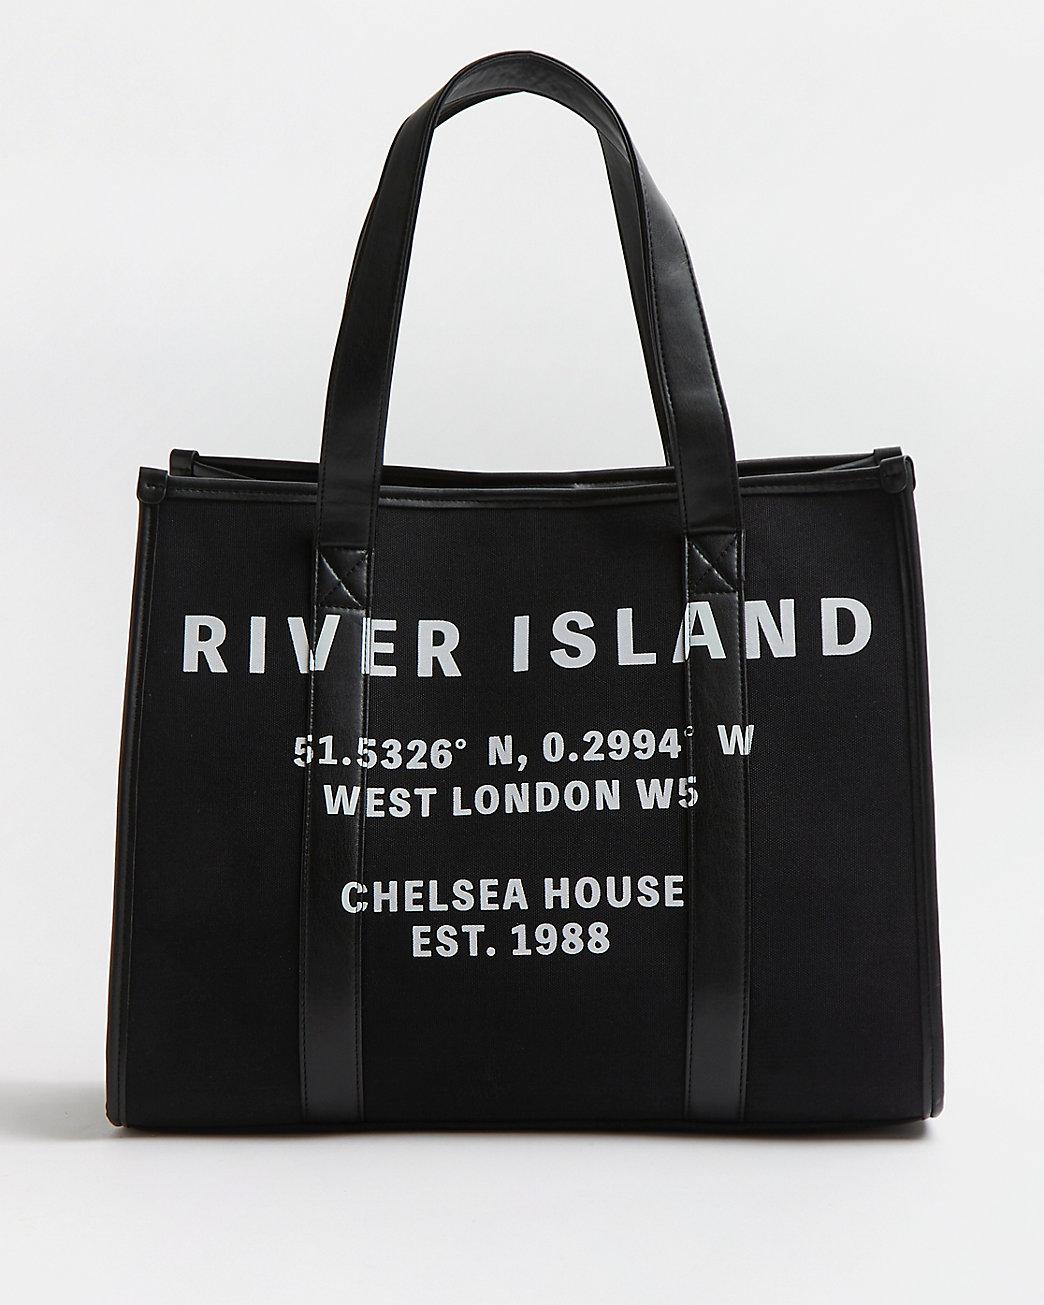 River Island is giving shoppers 15% off first order with this